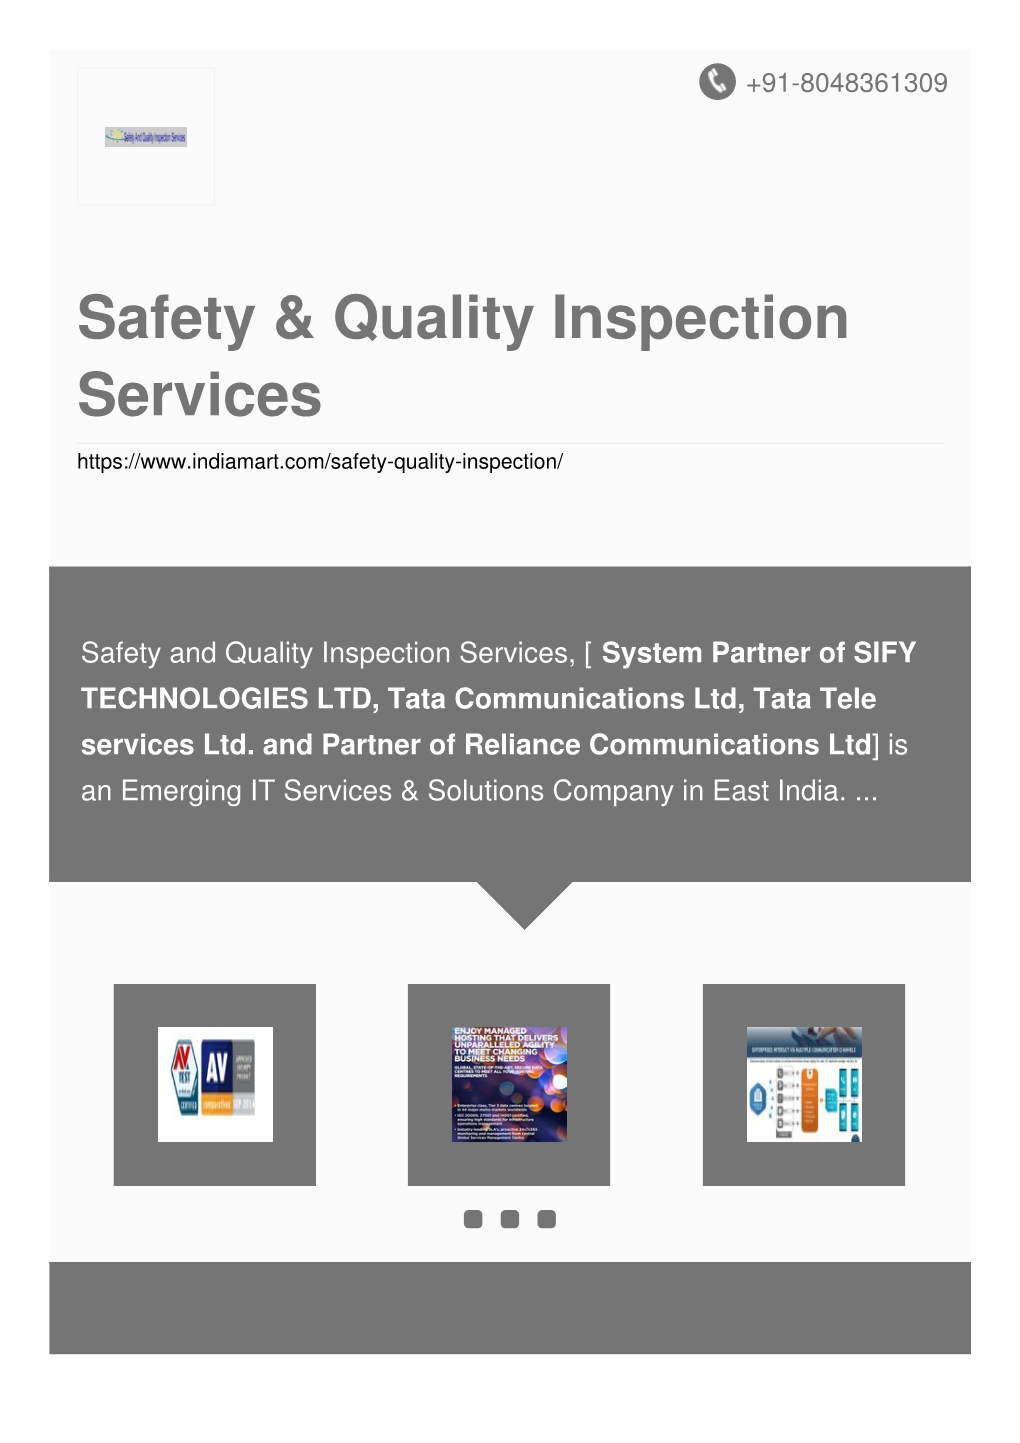 Safety & Quality Inspection Services